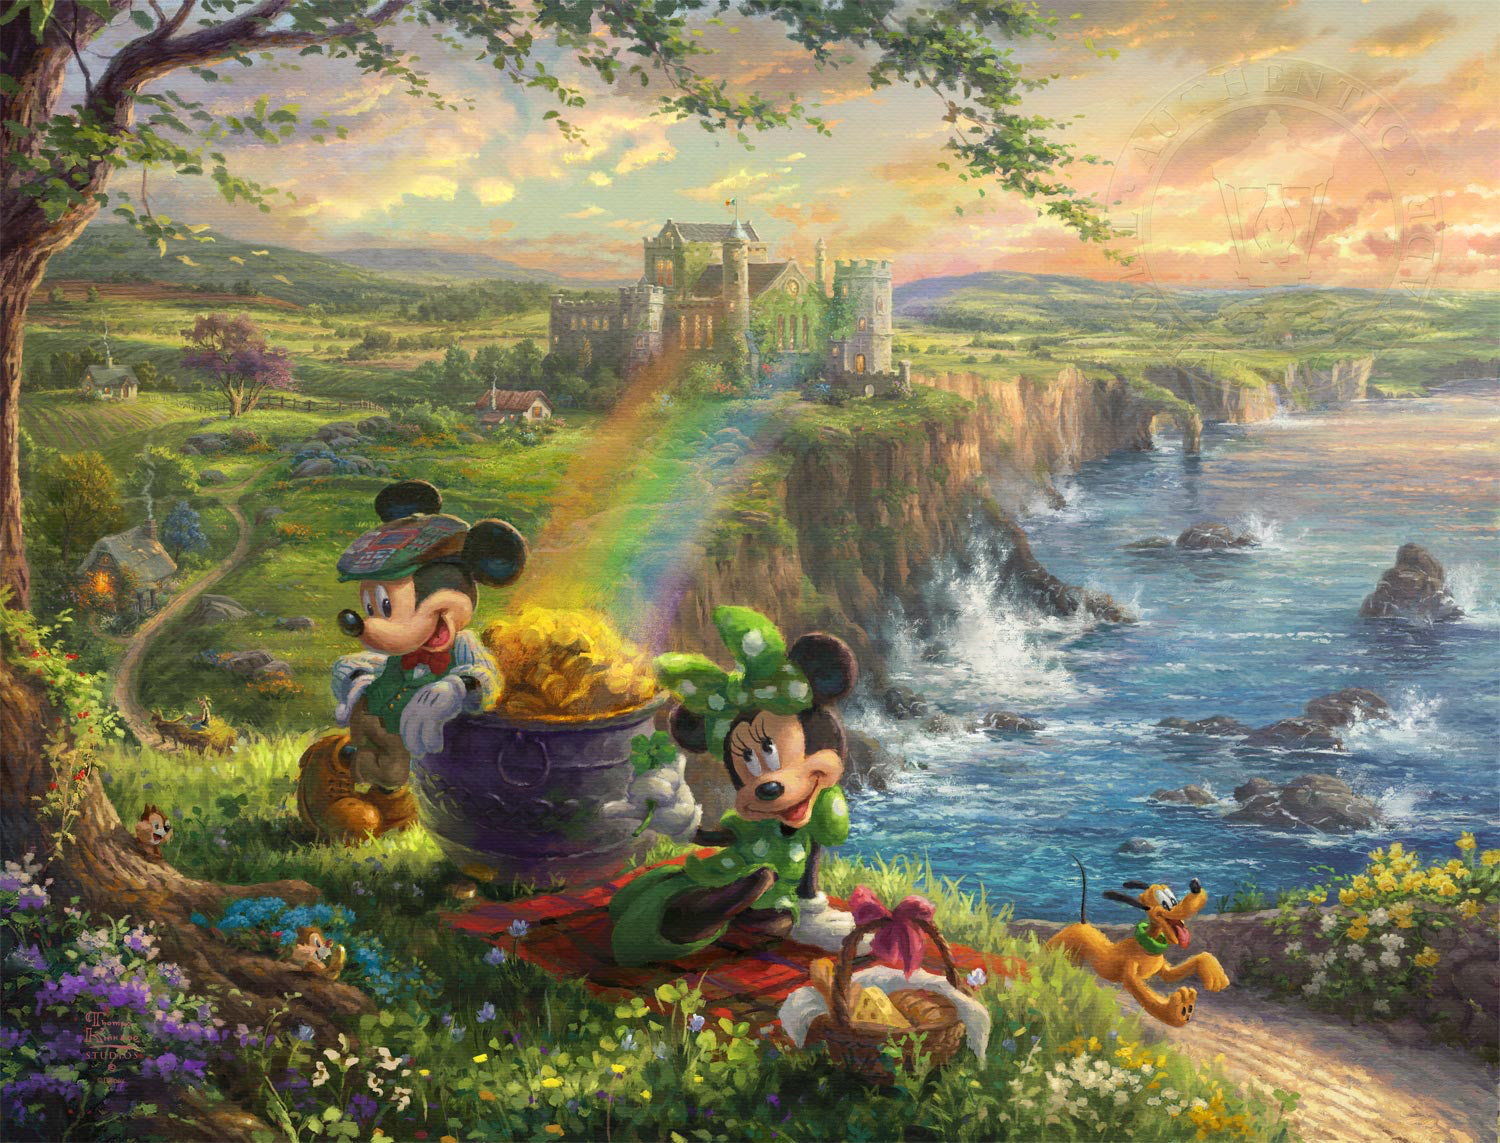 Thomas Kinkade Studios "Mickey and Minnie in Ireland" Limited and Open Canvas Giclee